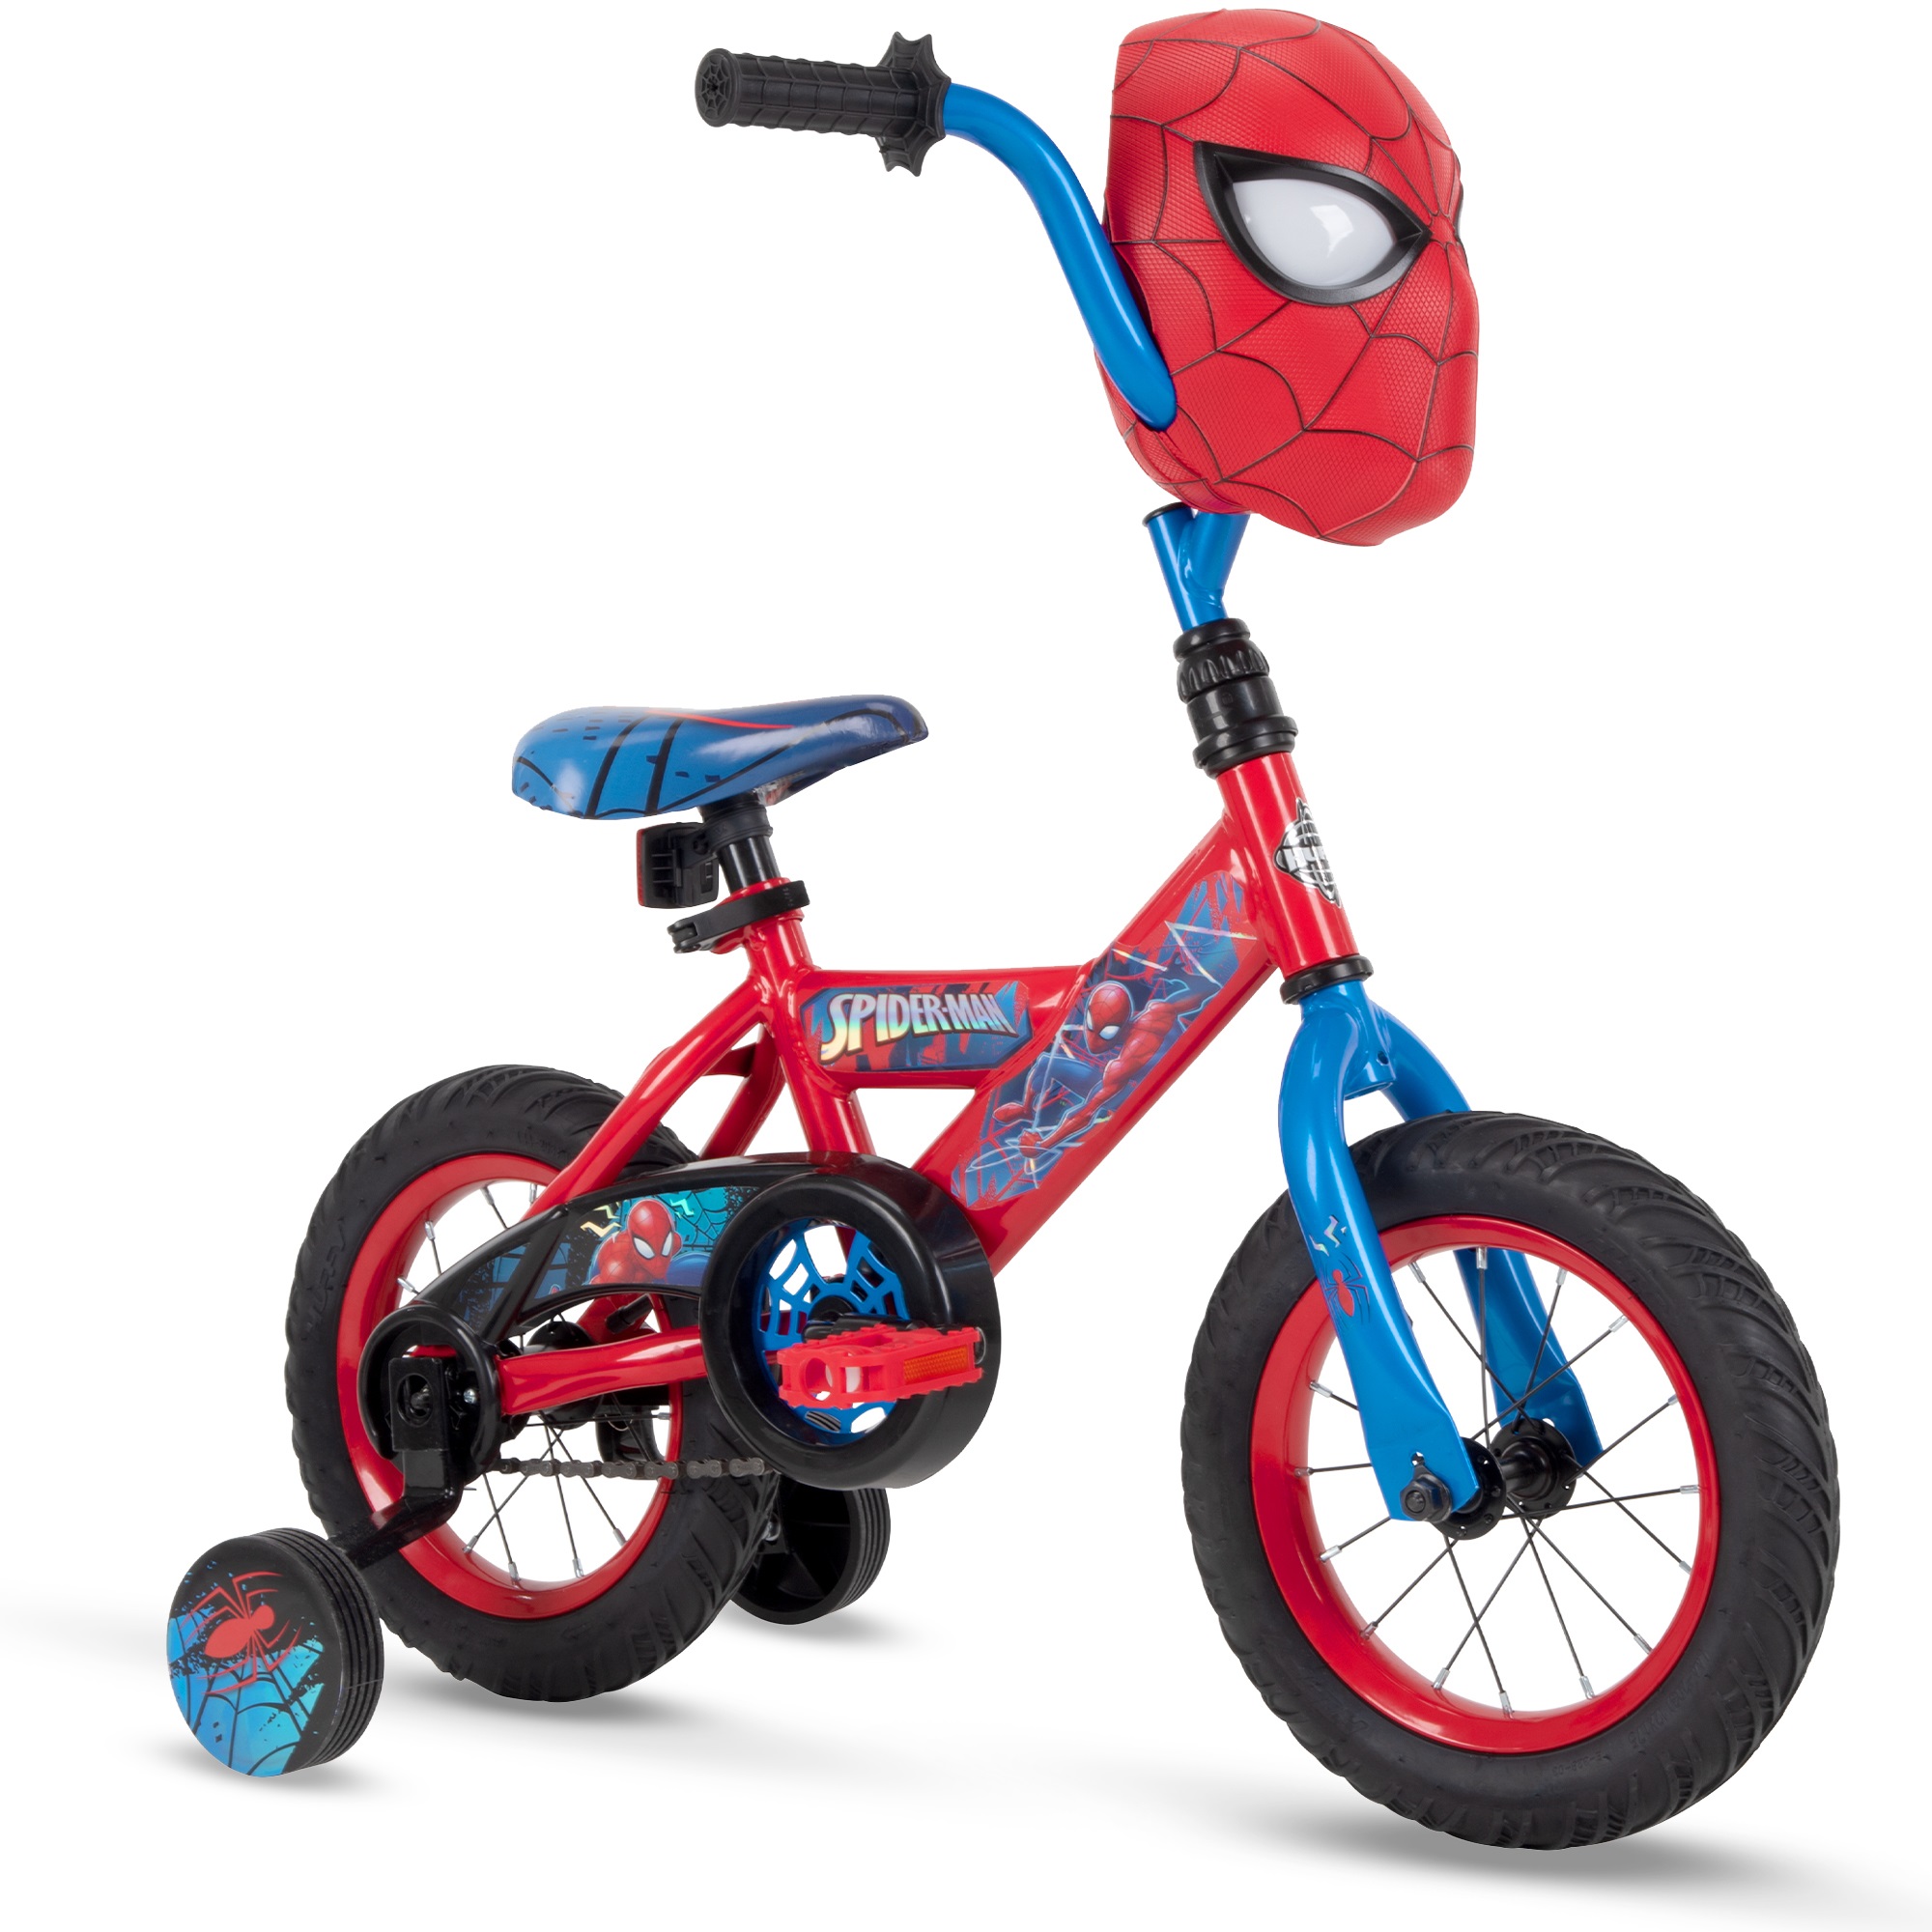 12" Marvel Spider-Man Bike with Training Wheels, for Boys', Red by Huffy - image 3 of 12